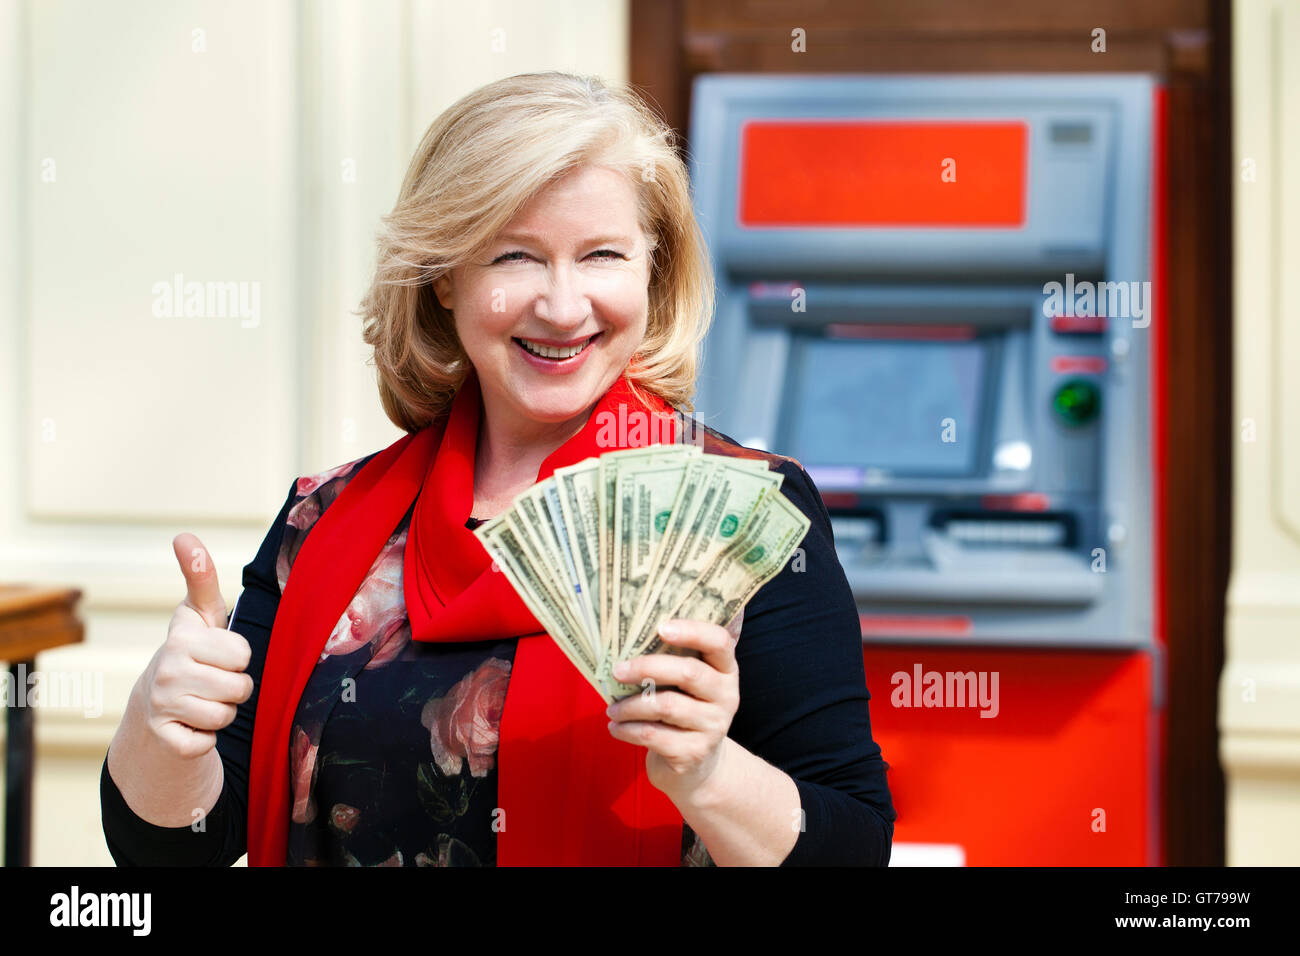 Mature blonde woman counting money near automated teller machine in shop Stock Photo